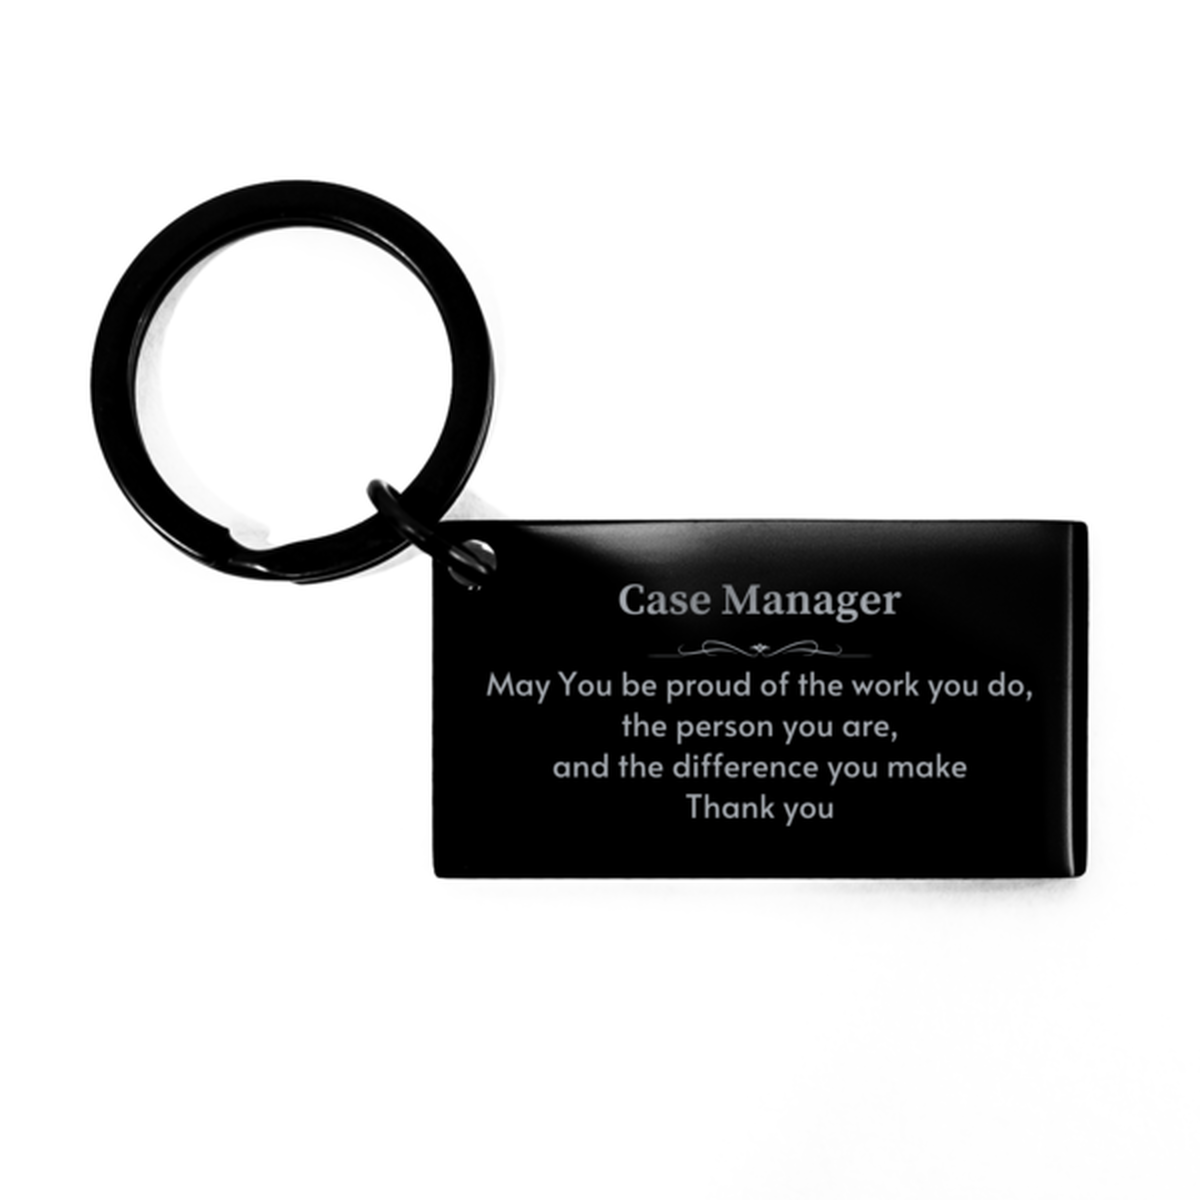 Heartwarming Keychain Retirement Coworkers Gifts for Case Manager, Dentist May You be proud of the work you do, the person you are Gifts for Boss Men Women Friends